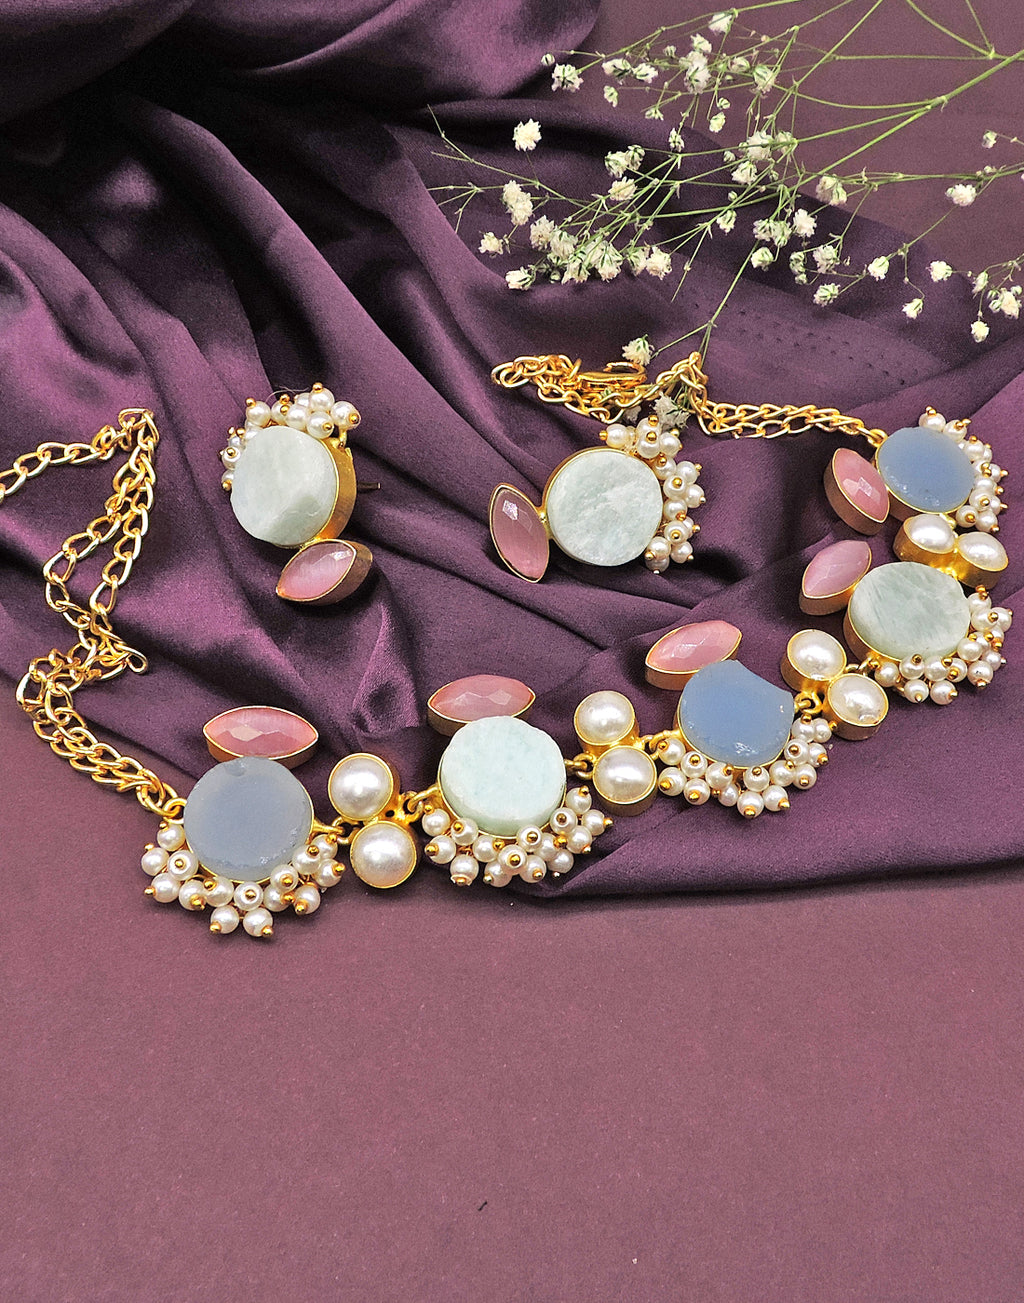 Jewelled Trio Necklace - Statement Necklaces - Gold-Plated & Hypoallergenic Jewellery - Made in India - Dubai Jewellery - Dori